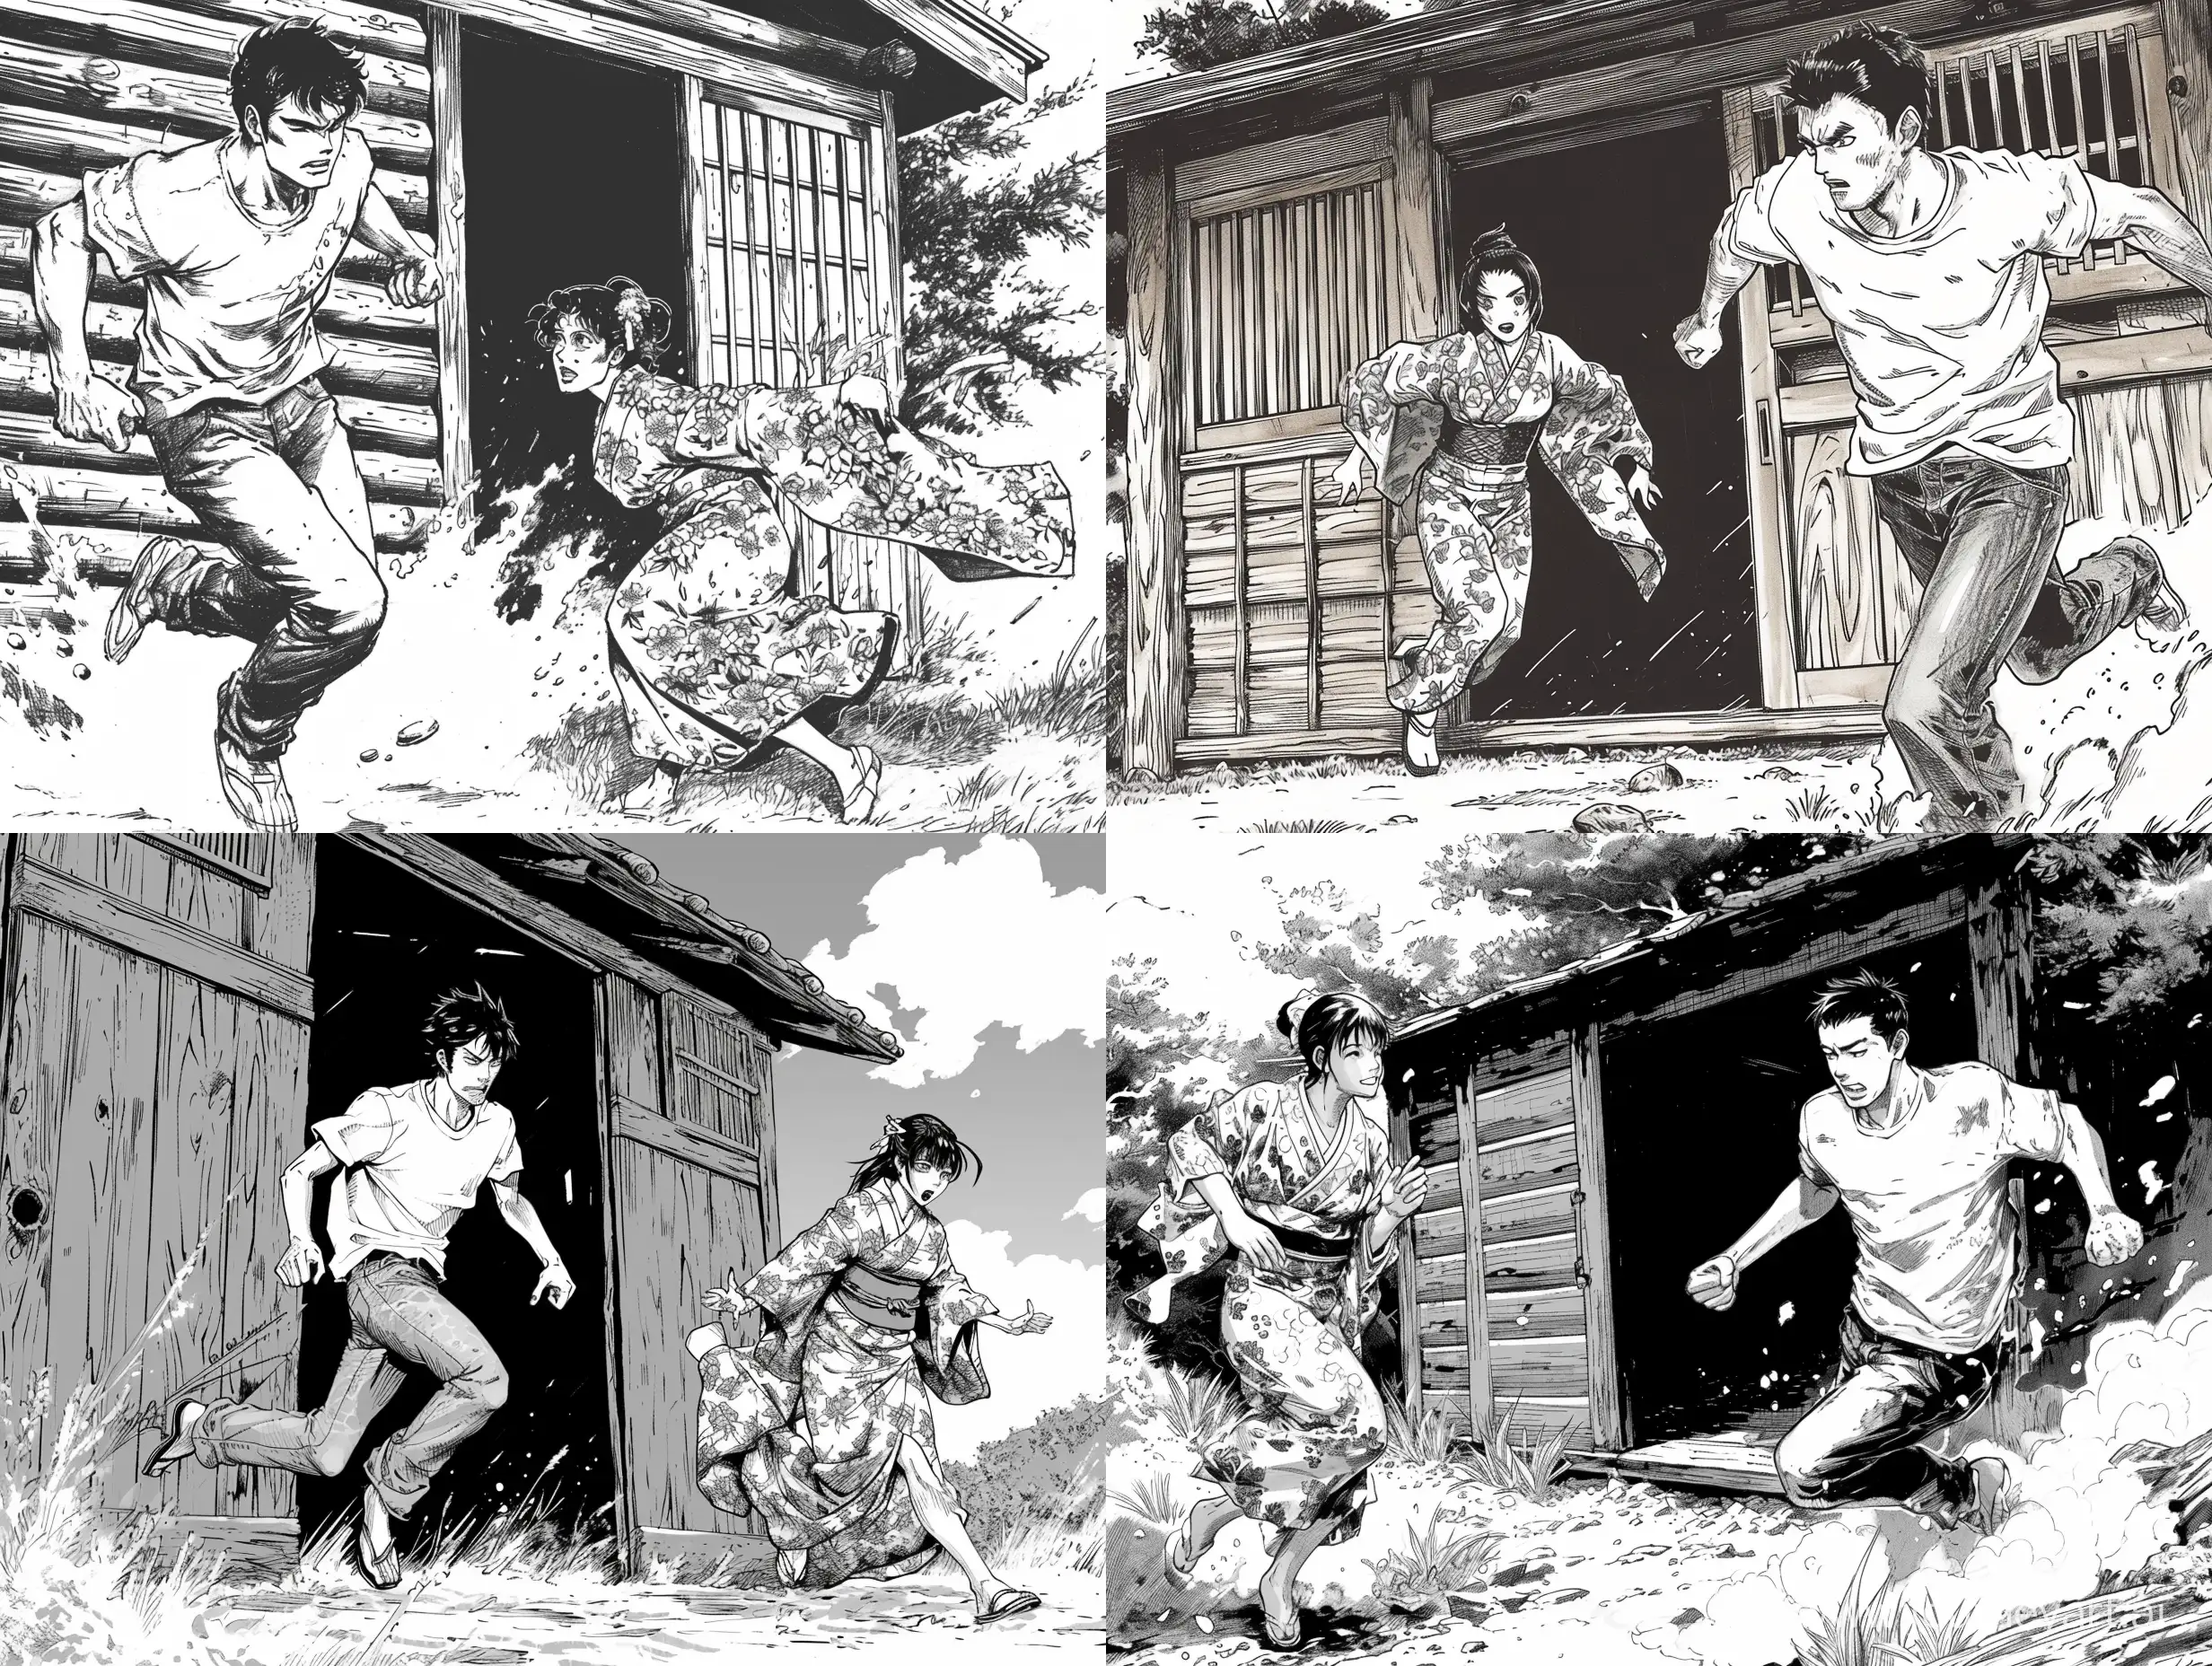 Man-in-White-TShirt-Collides-with-Woman-in-Kimono-Outside-Wooden-Cabin